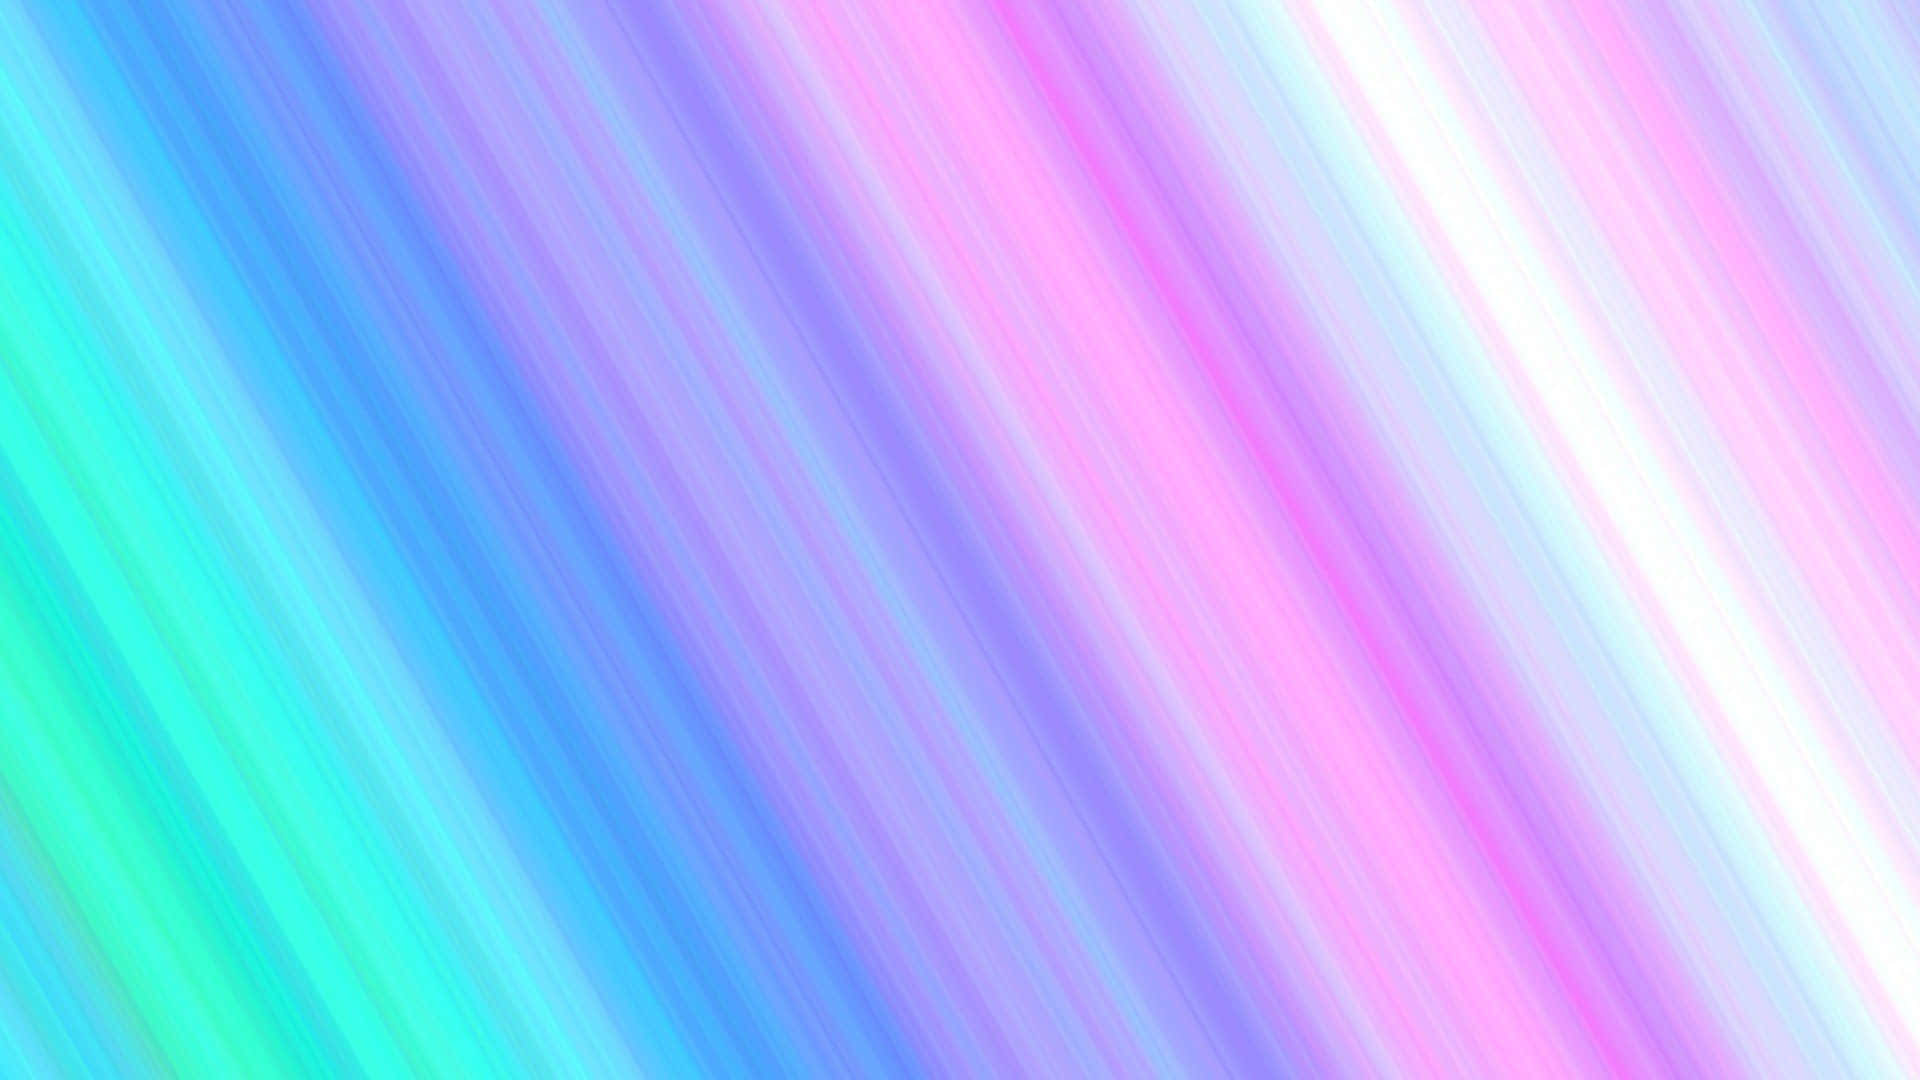 Mesmerizing Pink and Blue Gradient Background